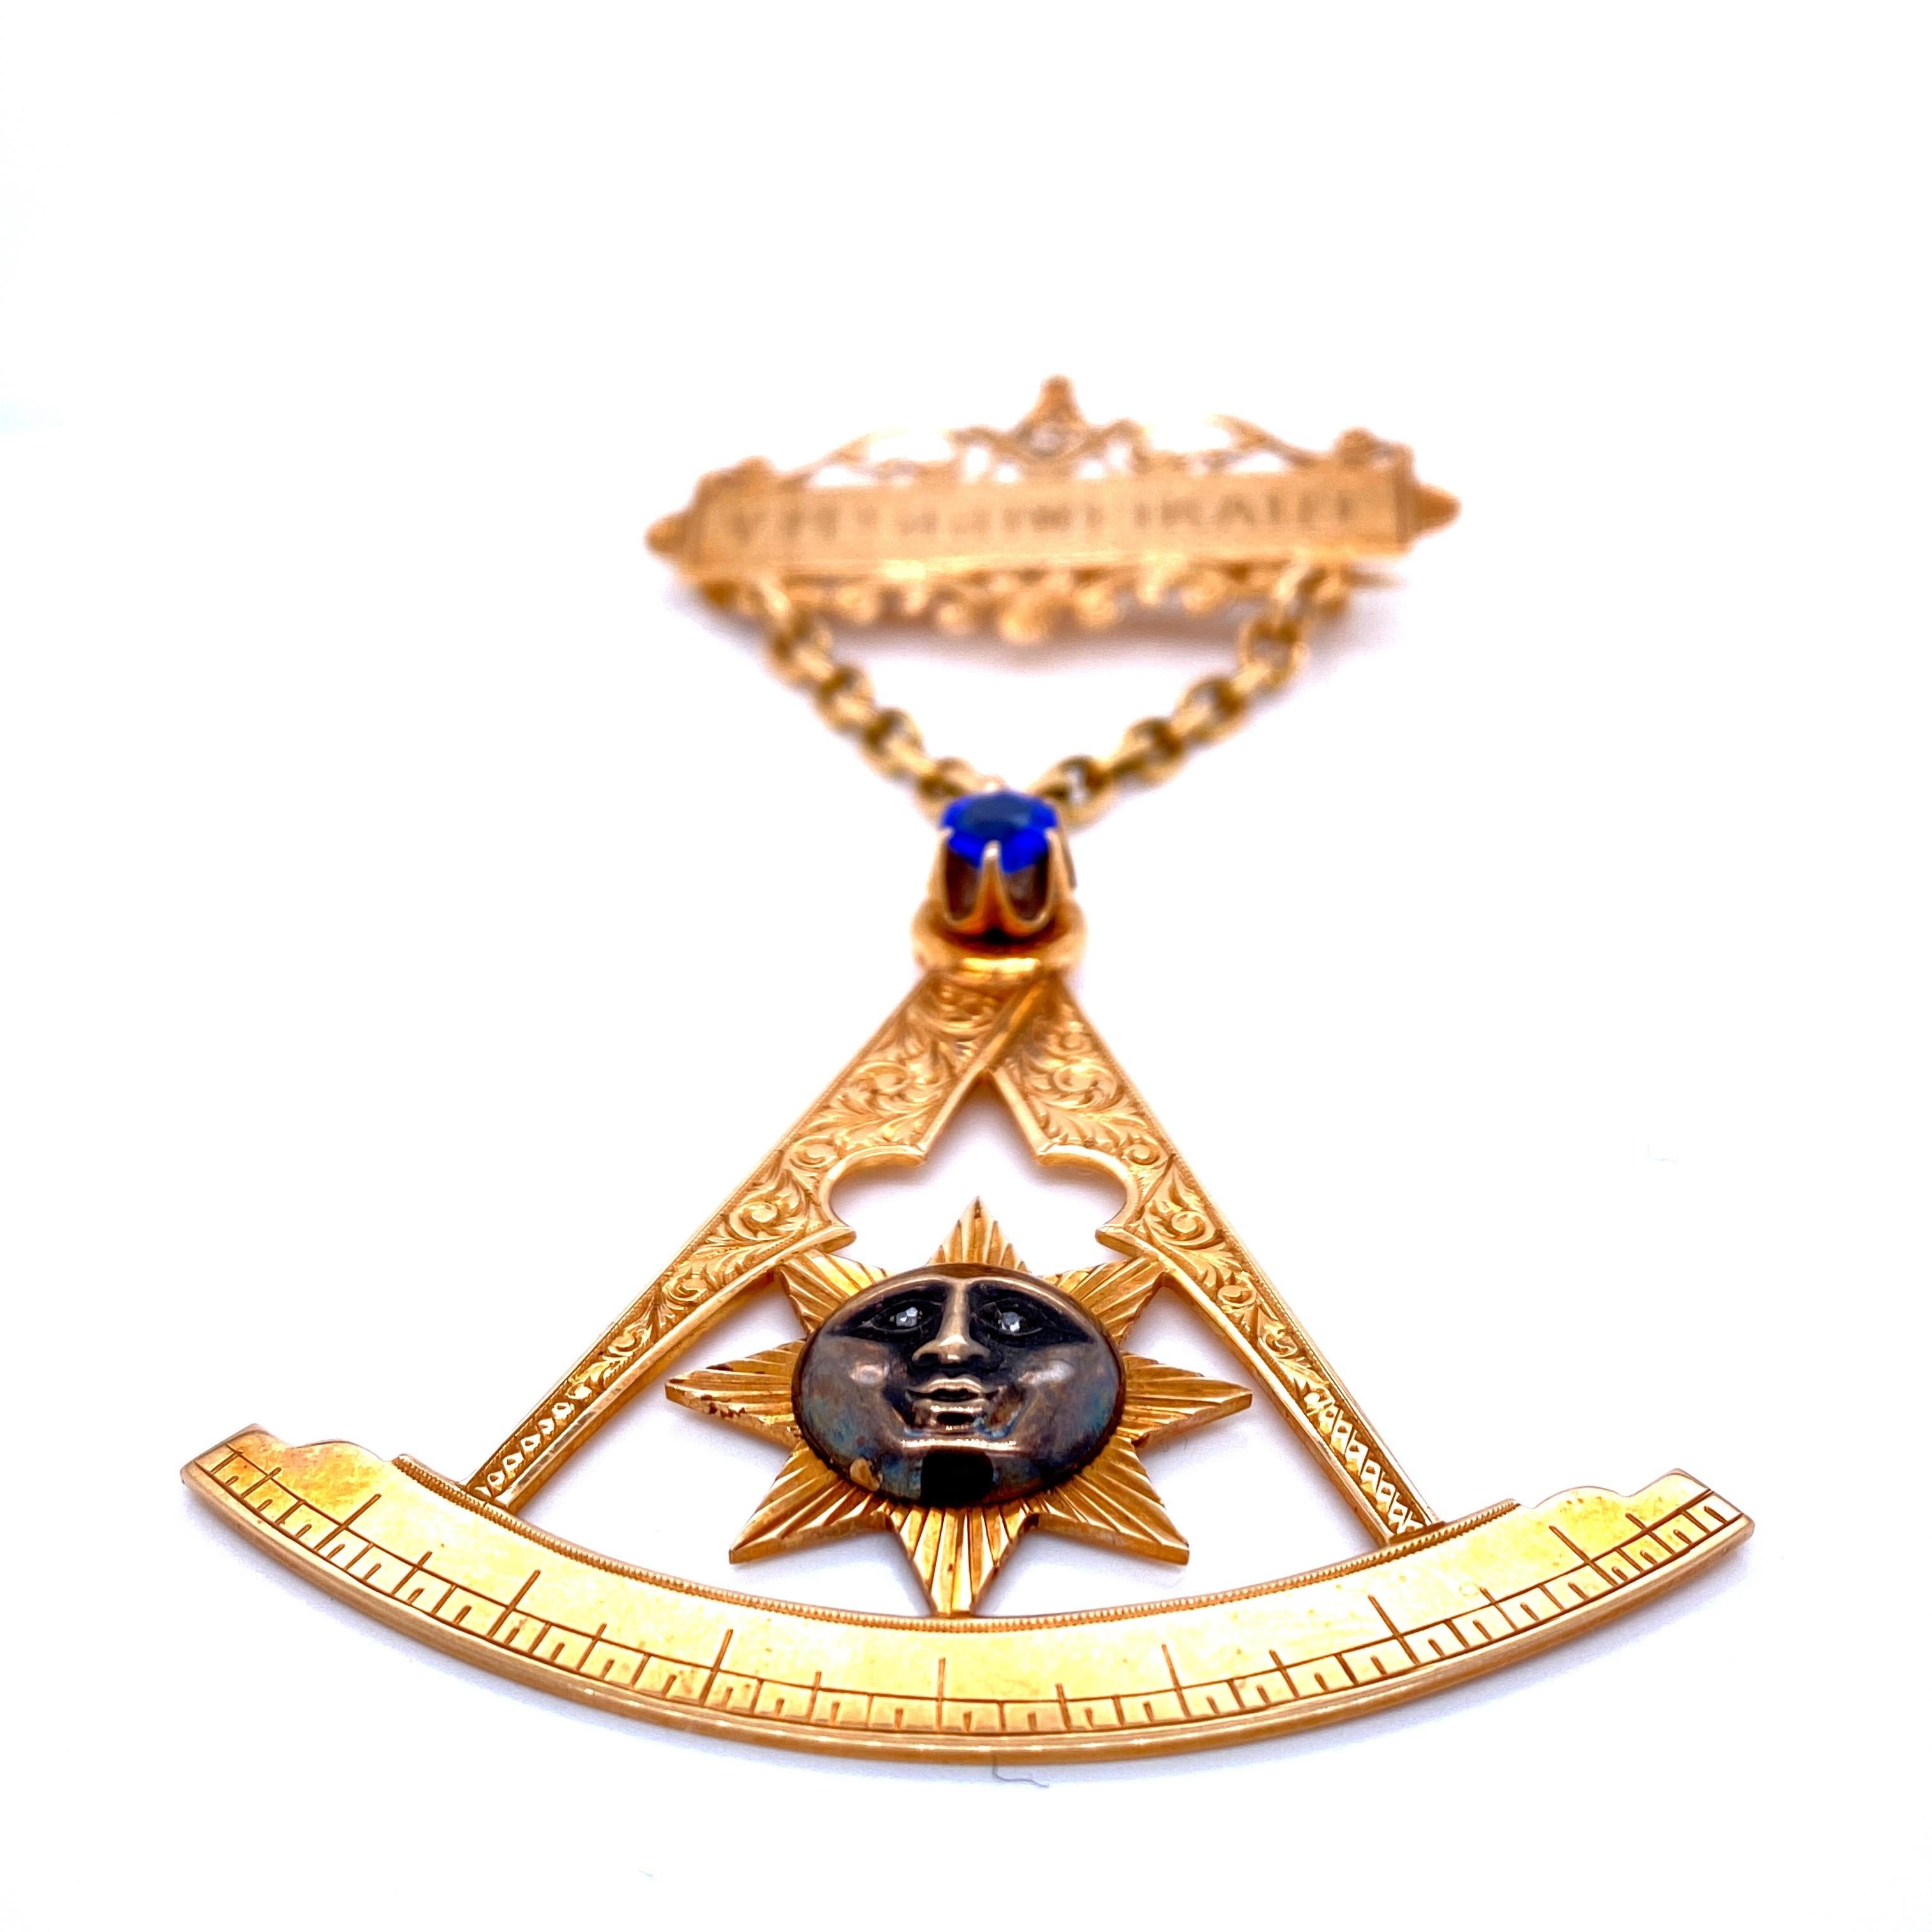 Unique authentic Freemasonry Antique Gold Badge/Pin, dated 1927, hallmarked and numbered. Belonged to a high freemasonry rank of Aberdeen Lodge.

The lower part features a sun face, with two rose cut diamonds set as eyes, framed in the Freemason